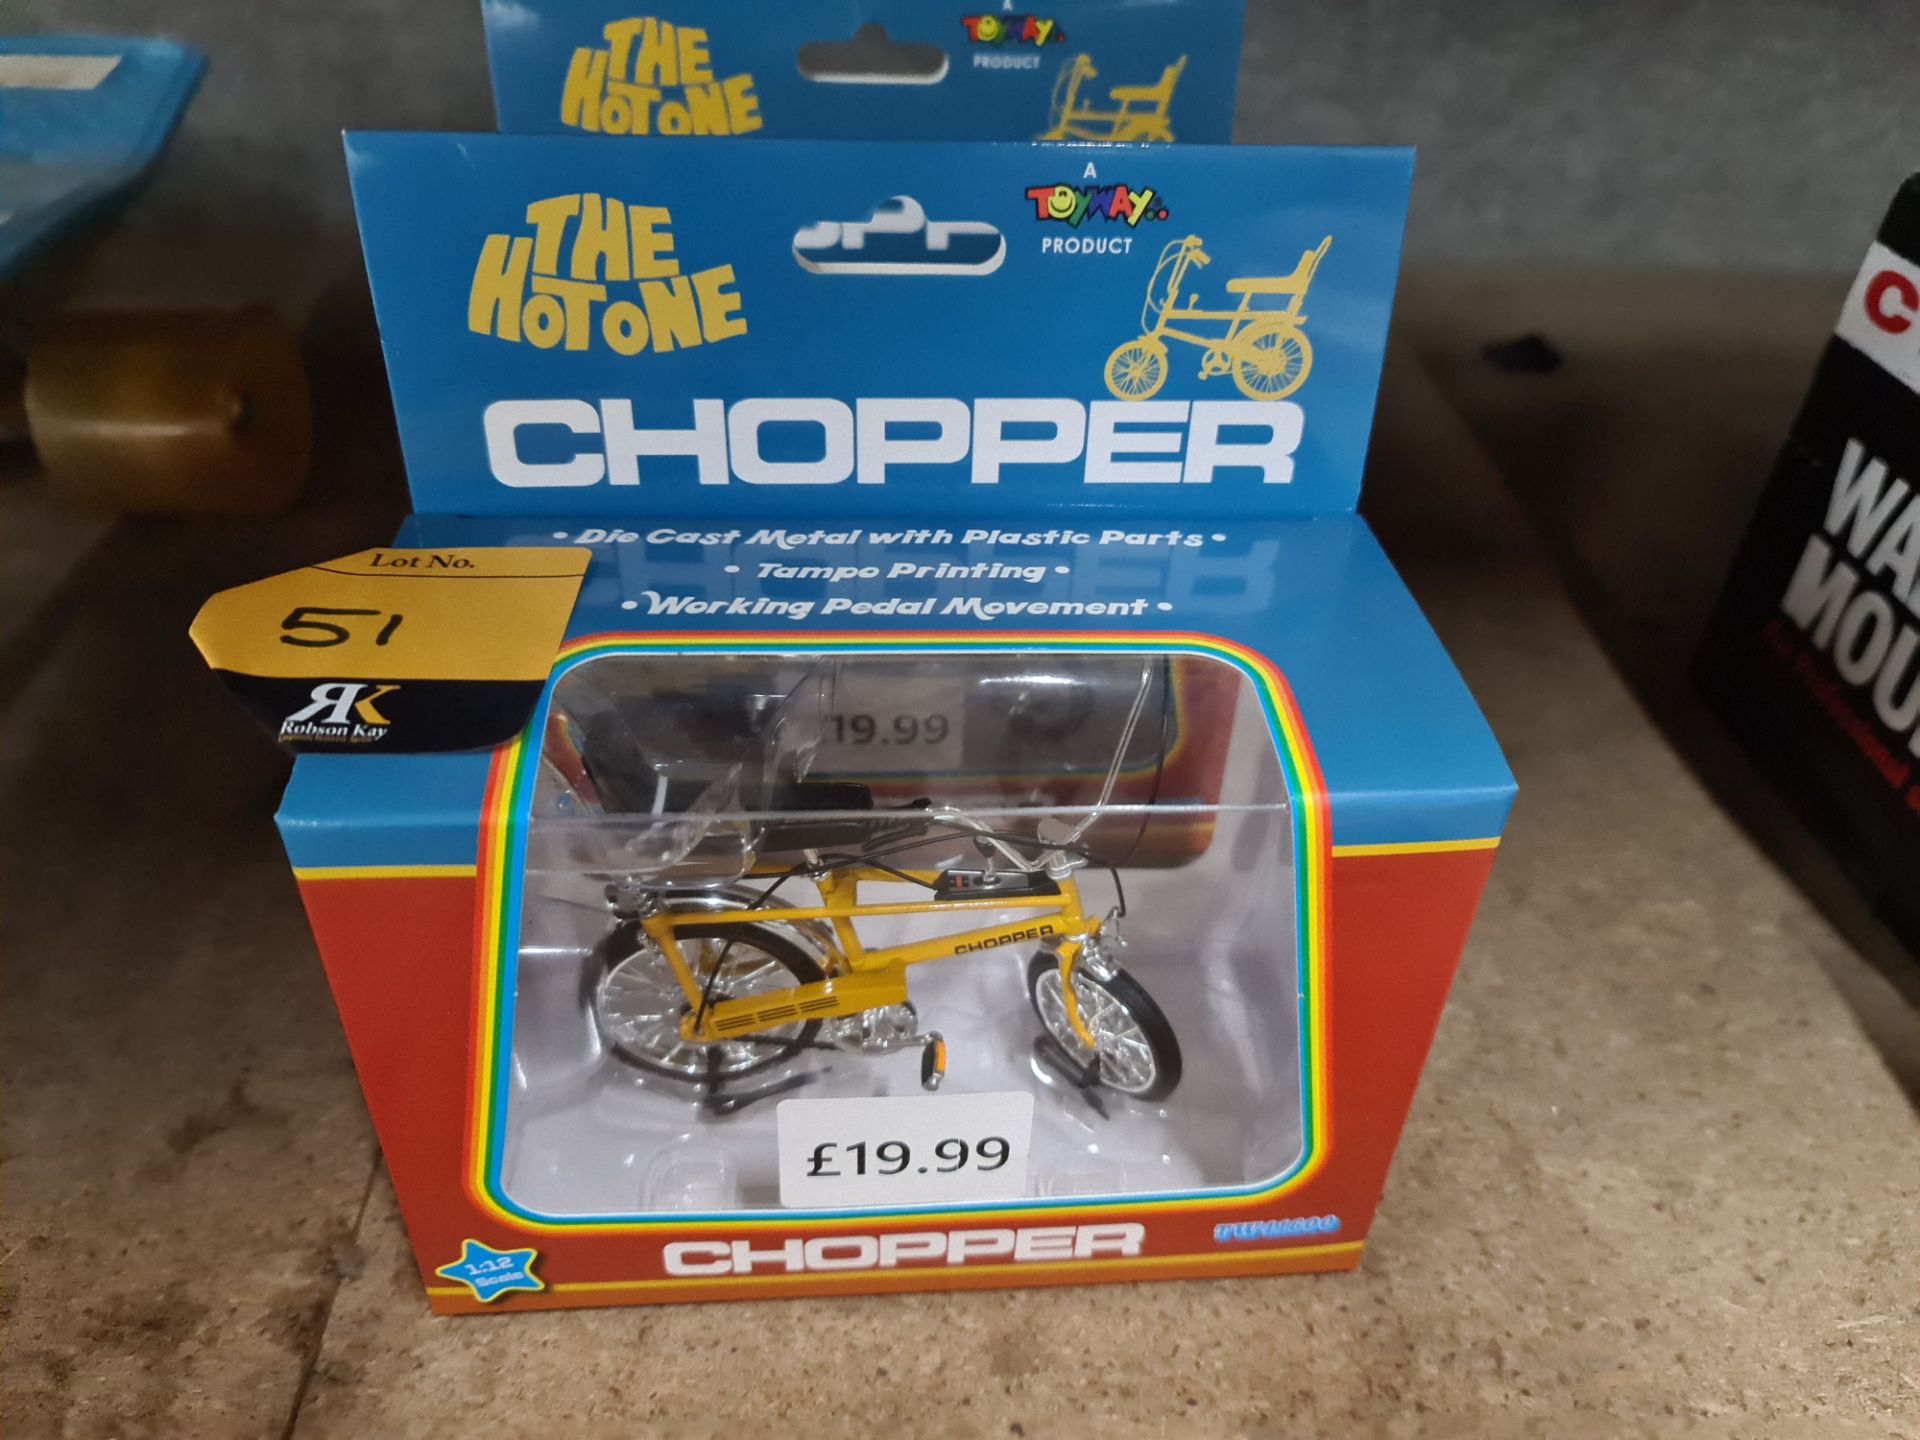 2 off The Hot One Chopper die cast metal toys - Image 3 of 4